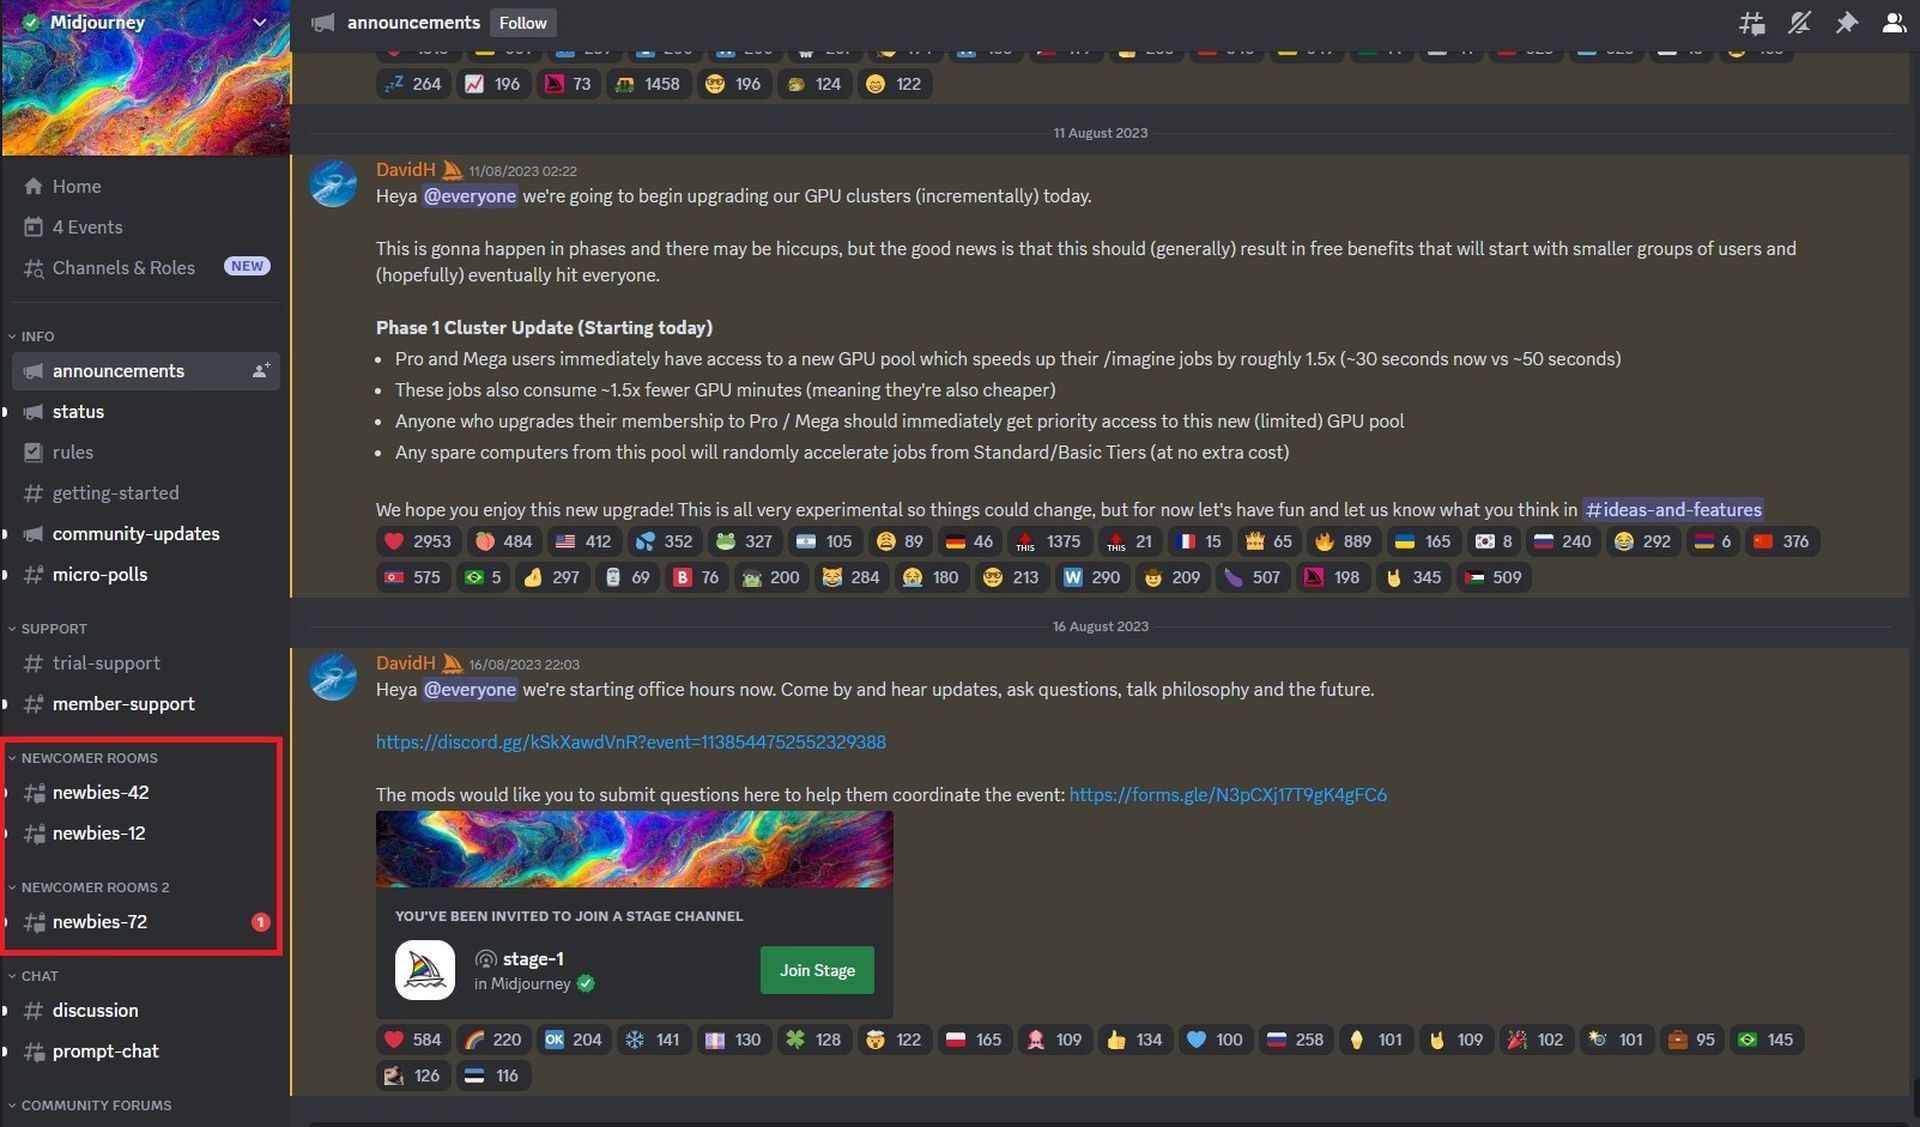 How to use Midjourney on Discord